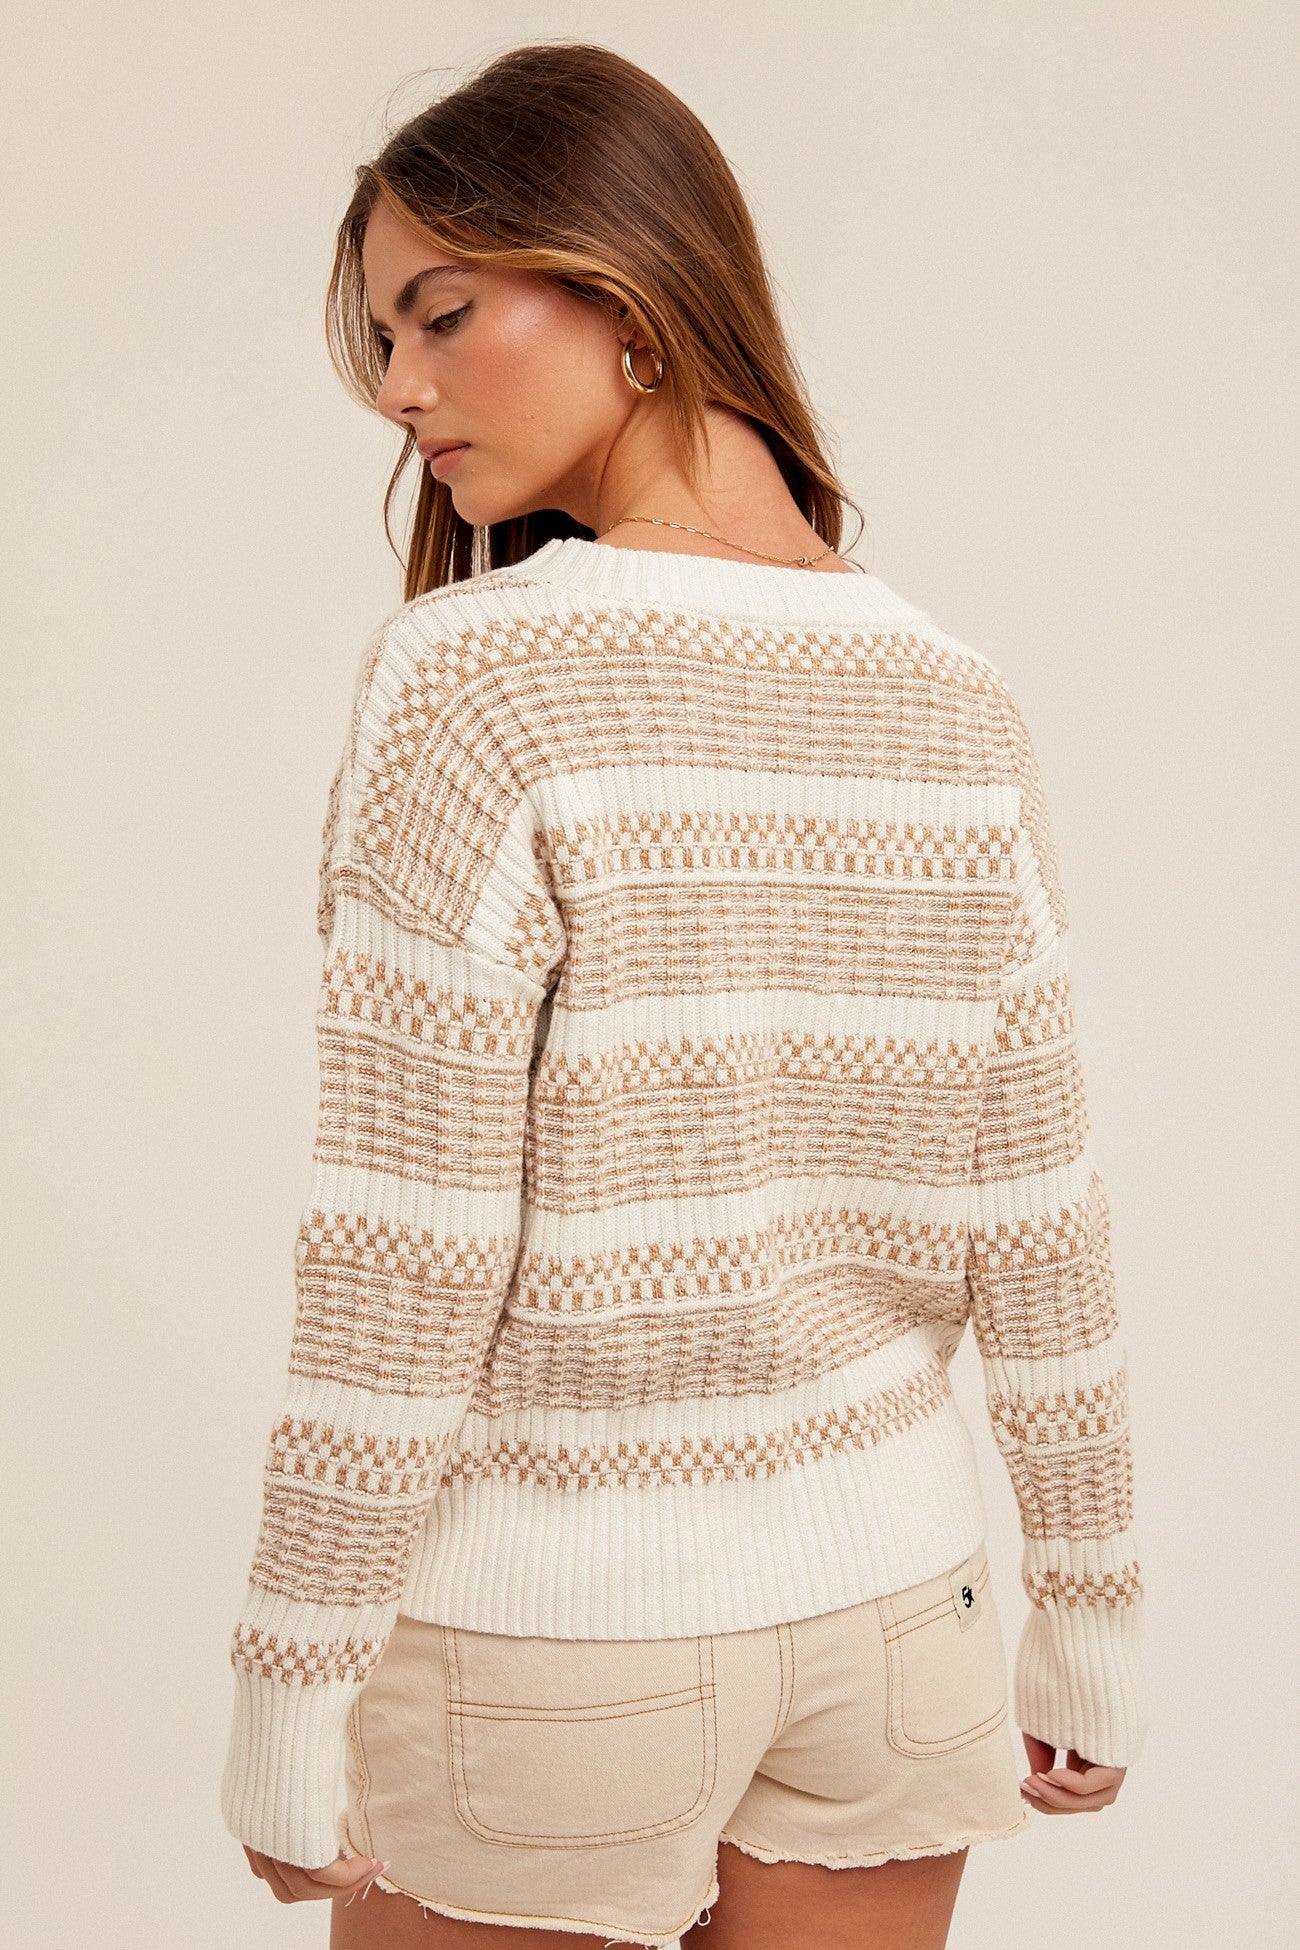 The Leah Round Neck Textured Sweater